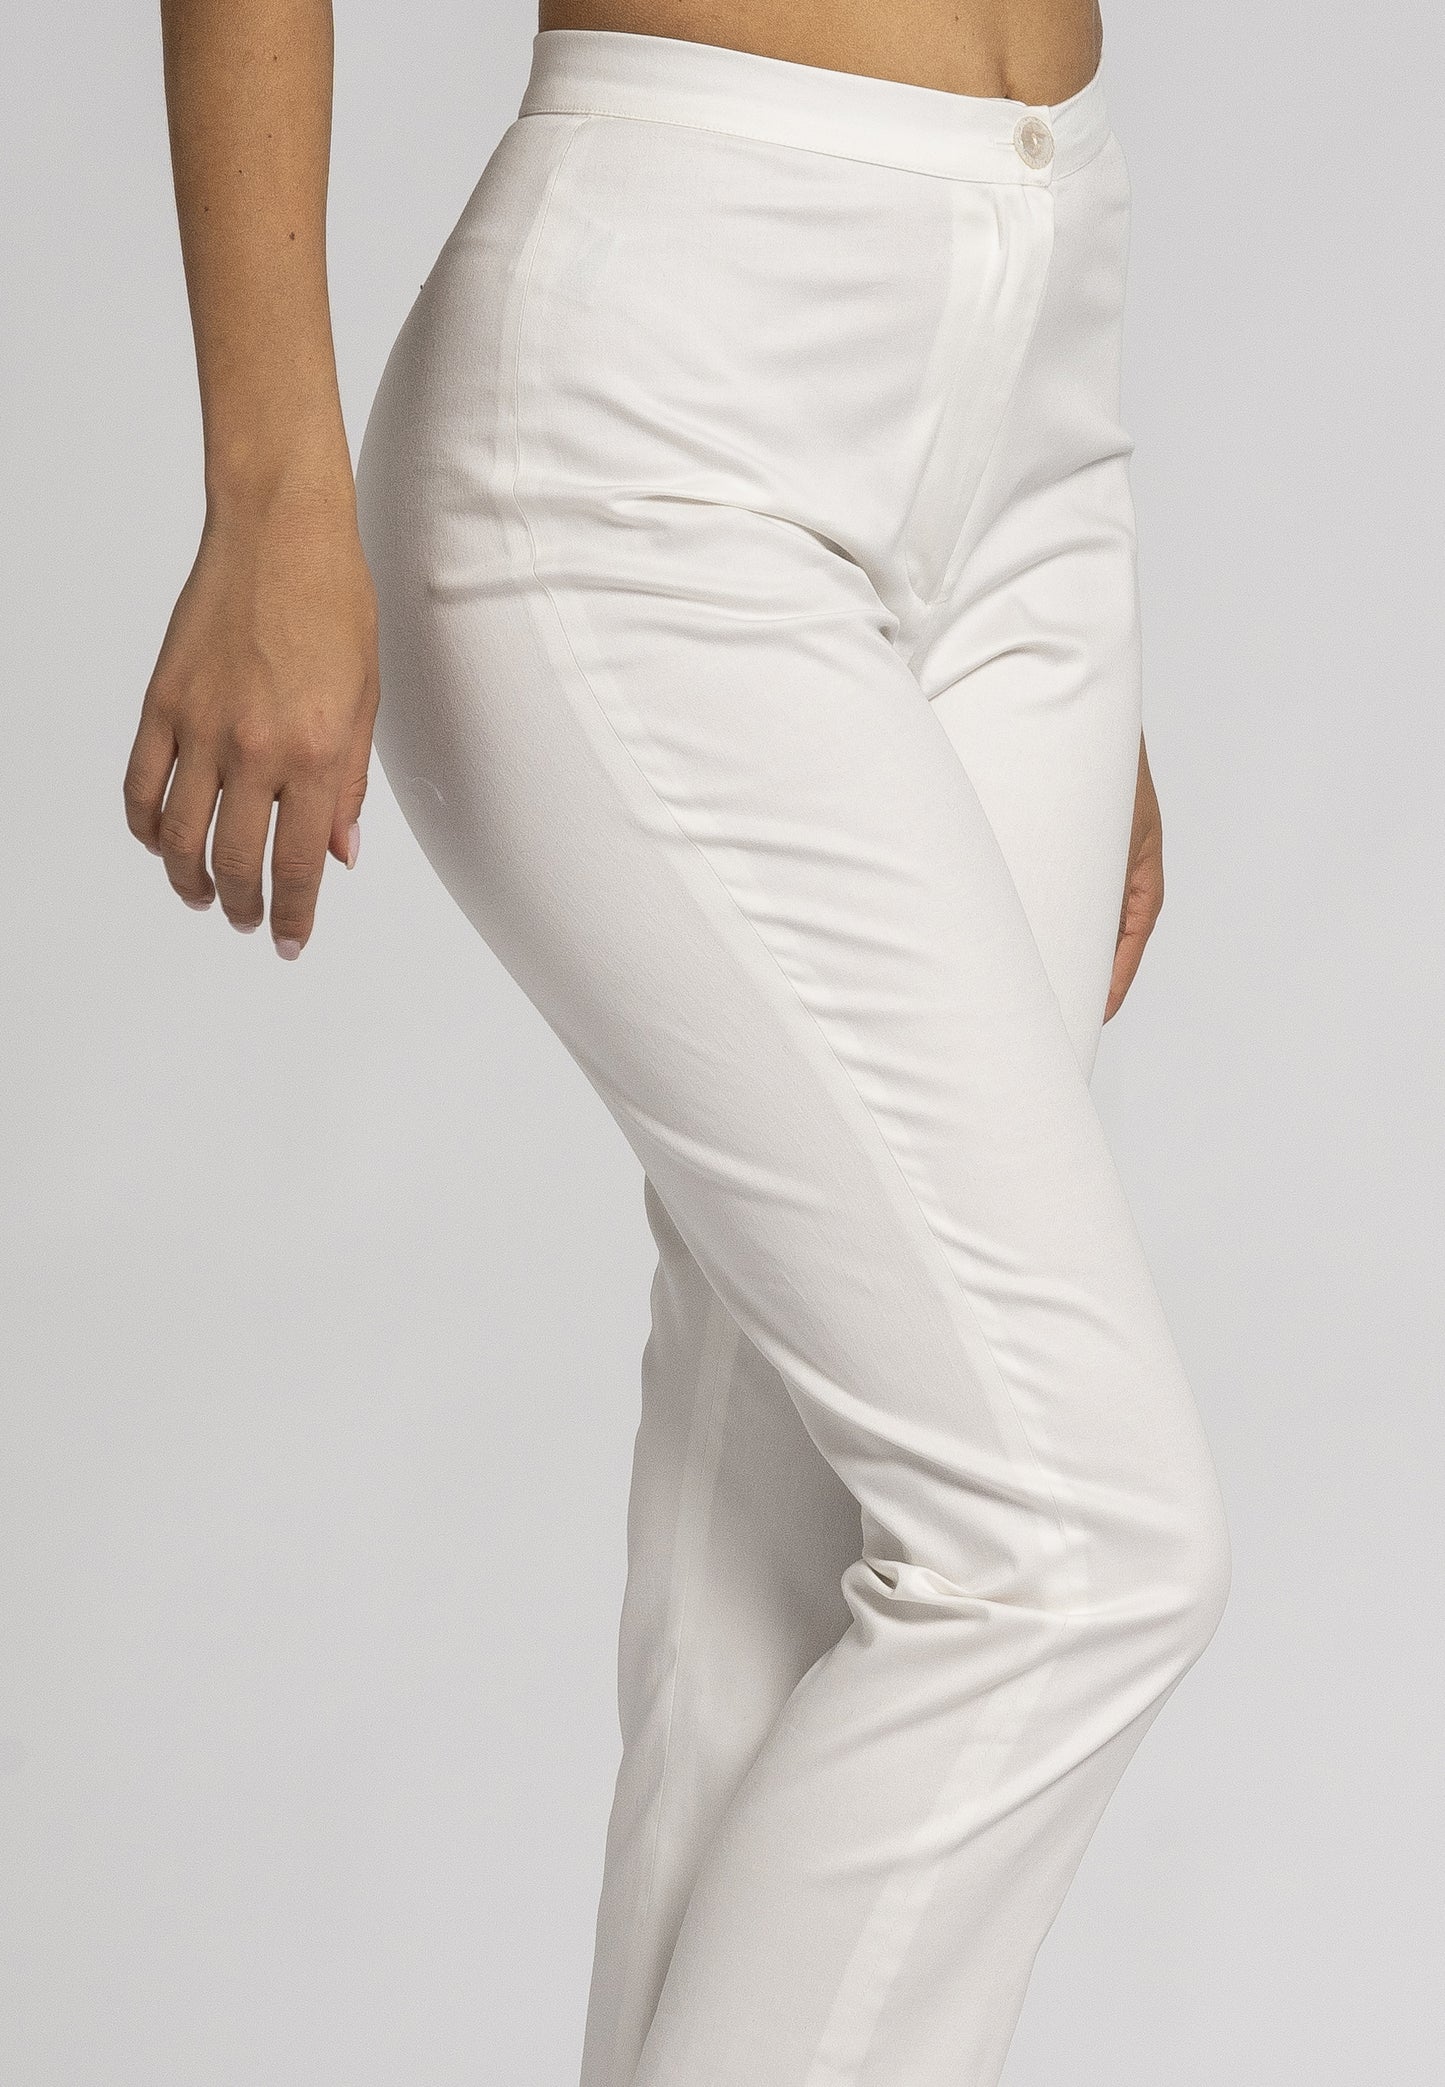 Primula Slim Fit Pants - White Stretch Cotton, Ankle-Length Leg, Zip and Button Front Opening